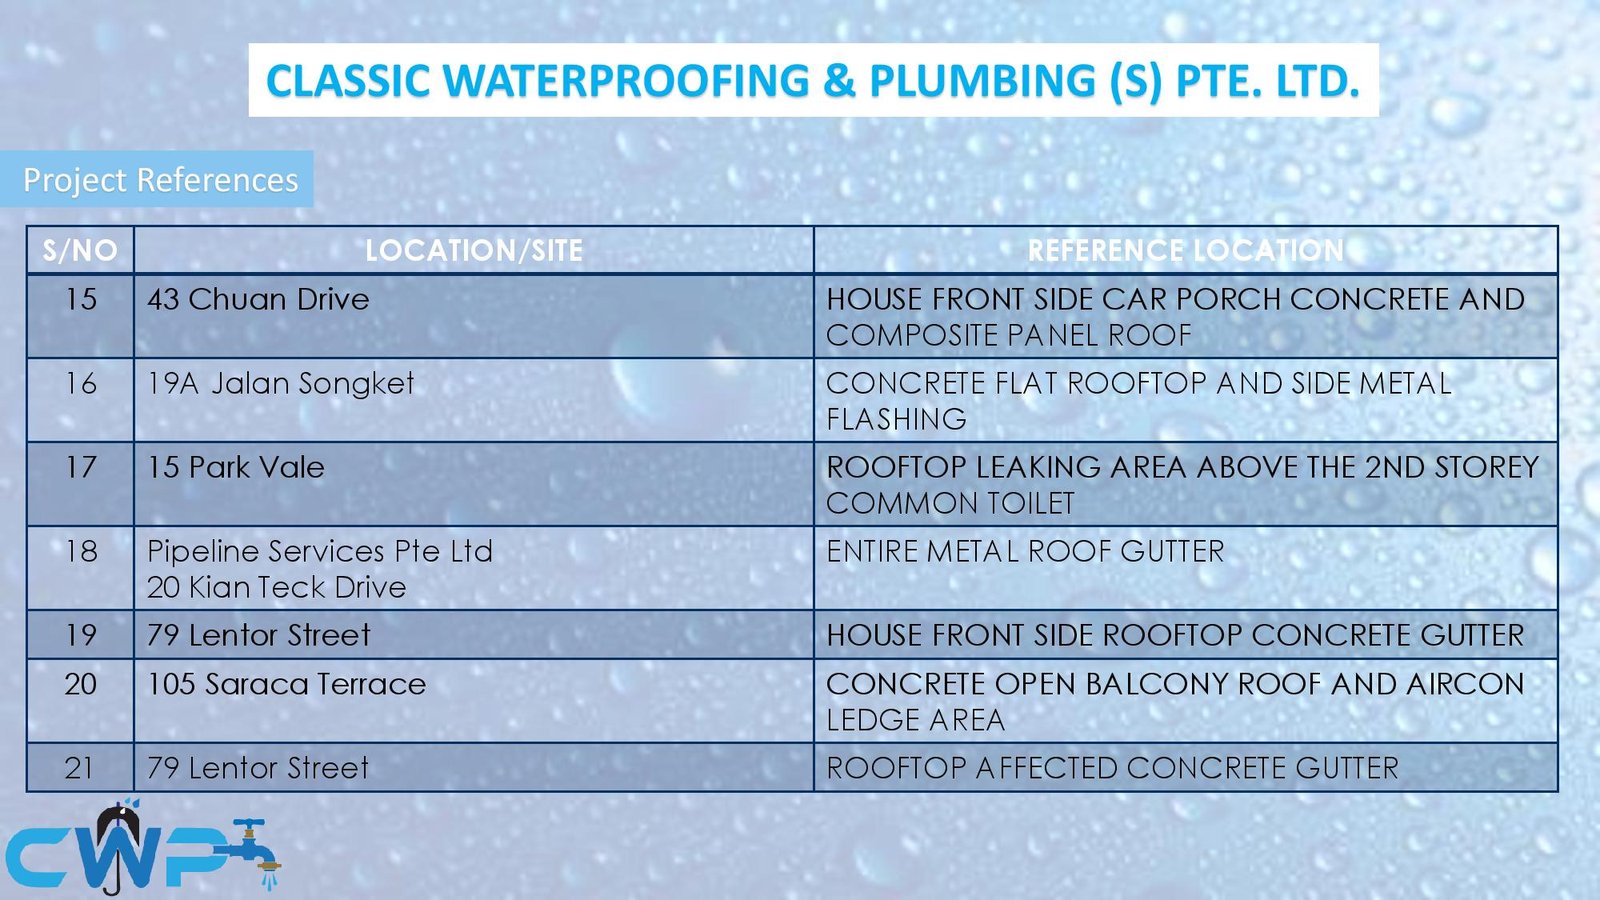 Waterproofing project references